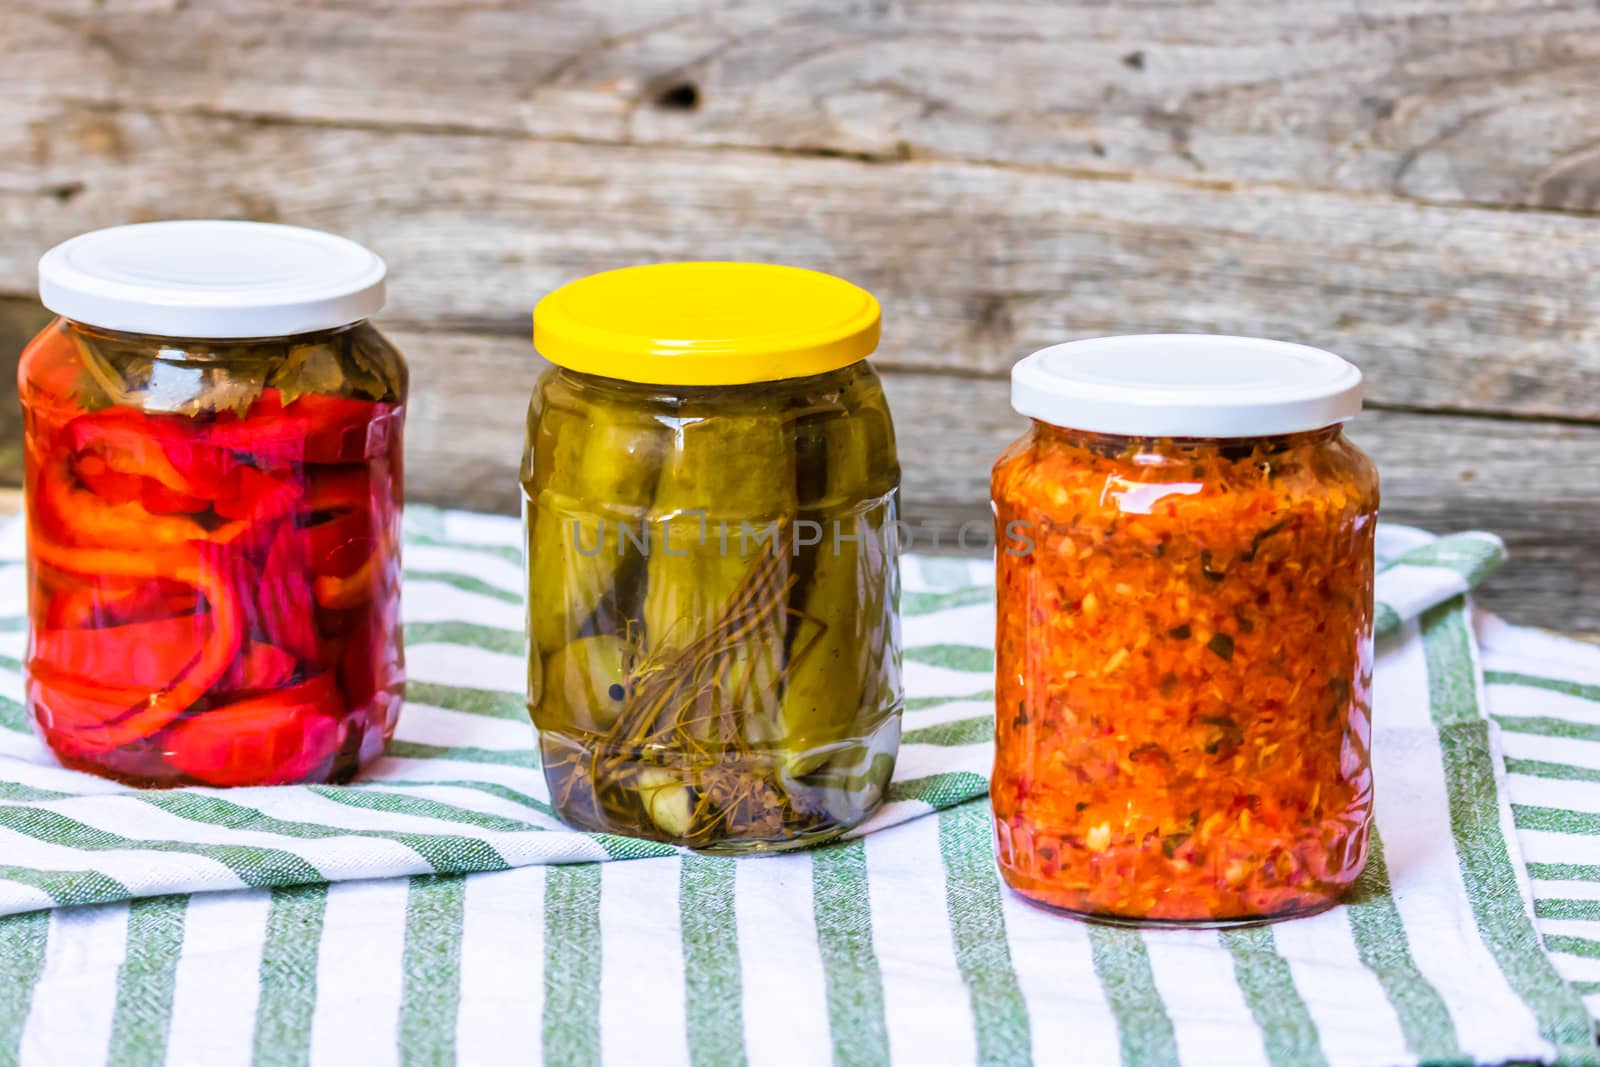  Glass jars with pickled red bell peppers and pickled cucumbers  by vladispas